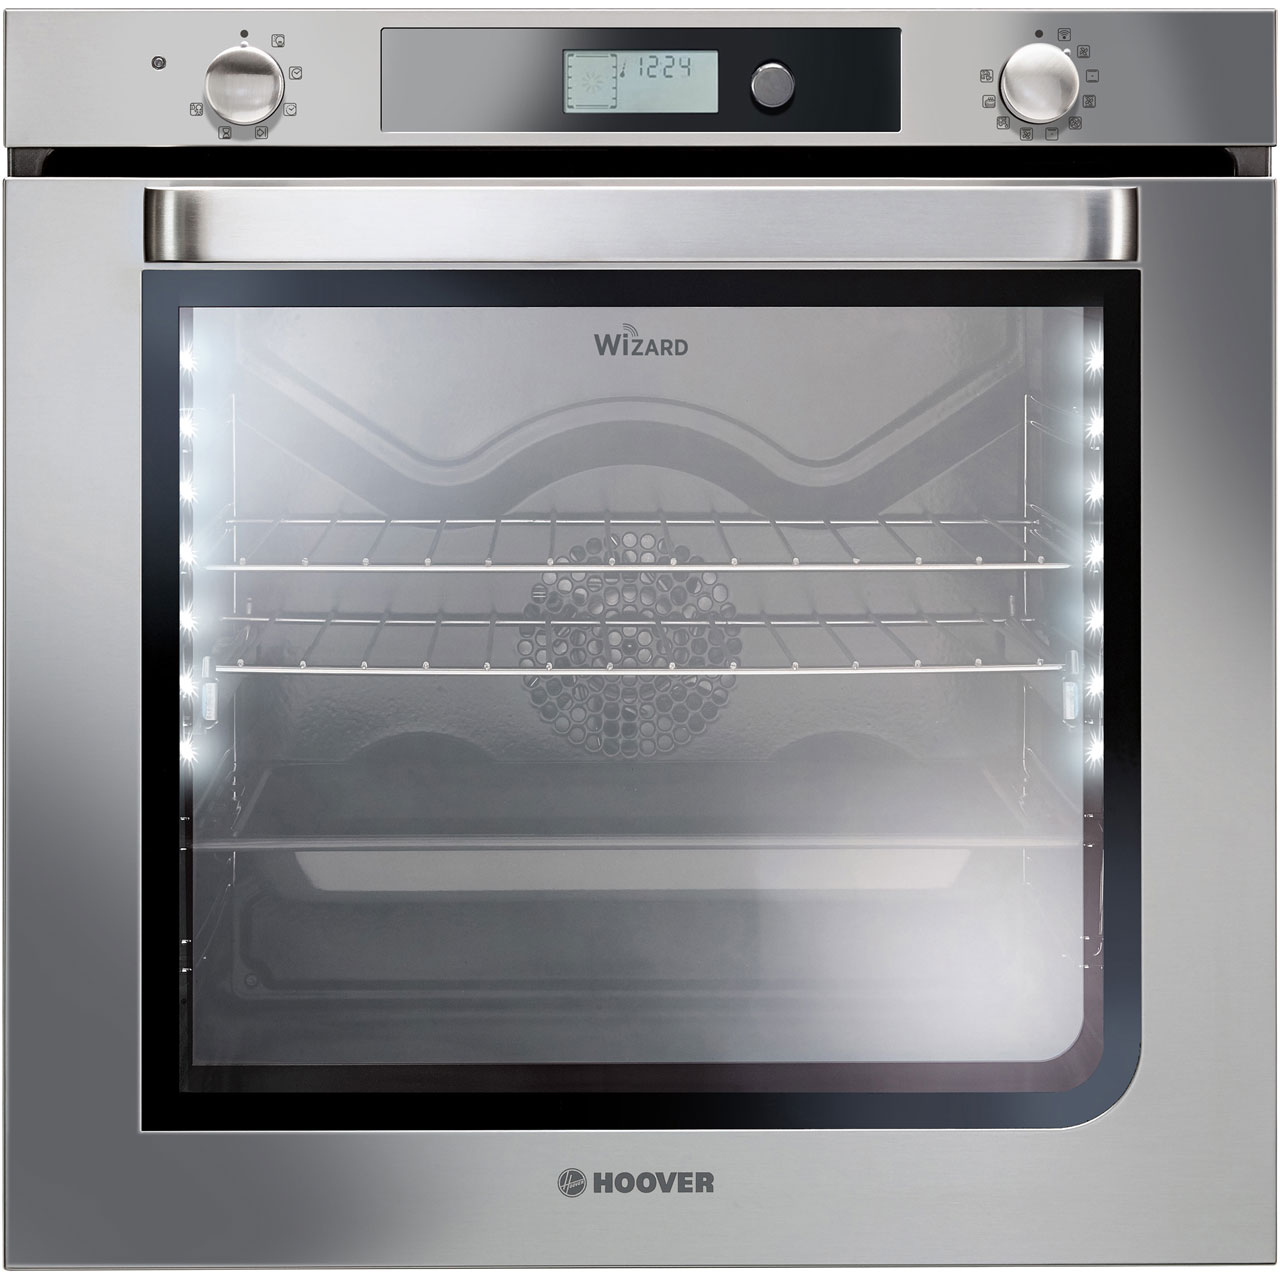 Hoover Wizard HO786VX Integrated Single Oven in Stainless Steel